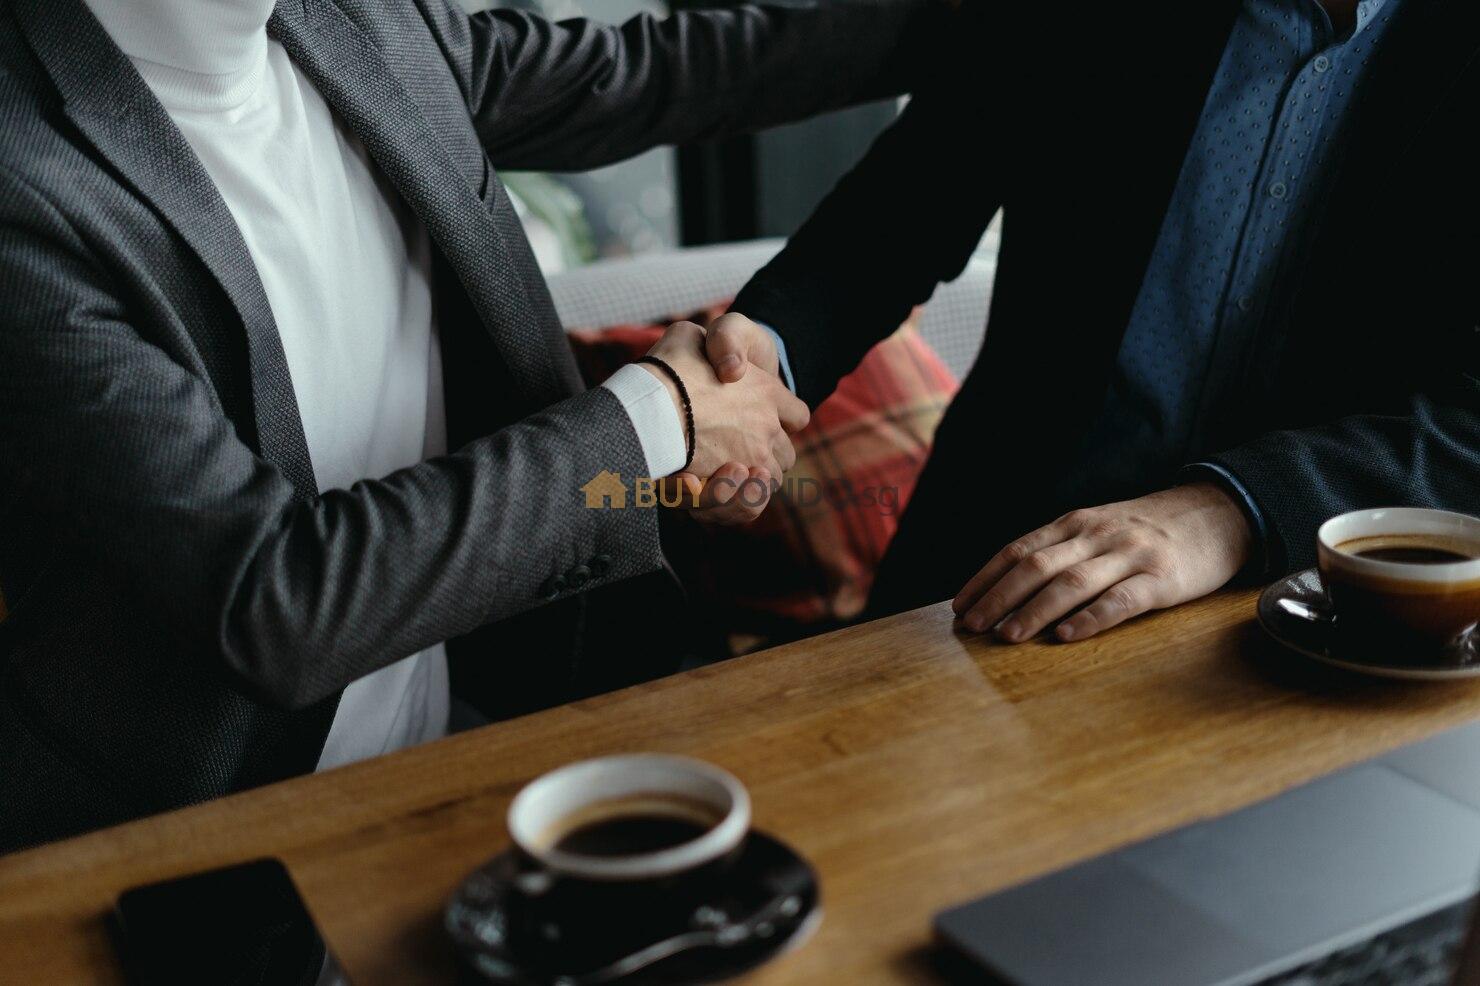 <a href="https://www.freepik.com/free-photo/two-businessmen-shaking-hands-as-sign-agreement_7621206.htm#page=2&query=Art%20of%20negotiation&position=34&from_view=search&track=ais&uuid=434be80c-084a-48ac-9455-fb0ca3a75d10">Image by ArthurHidden</a> on Freepik